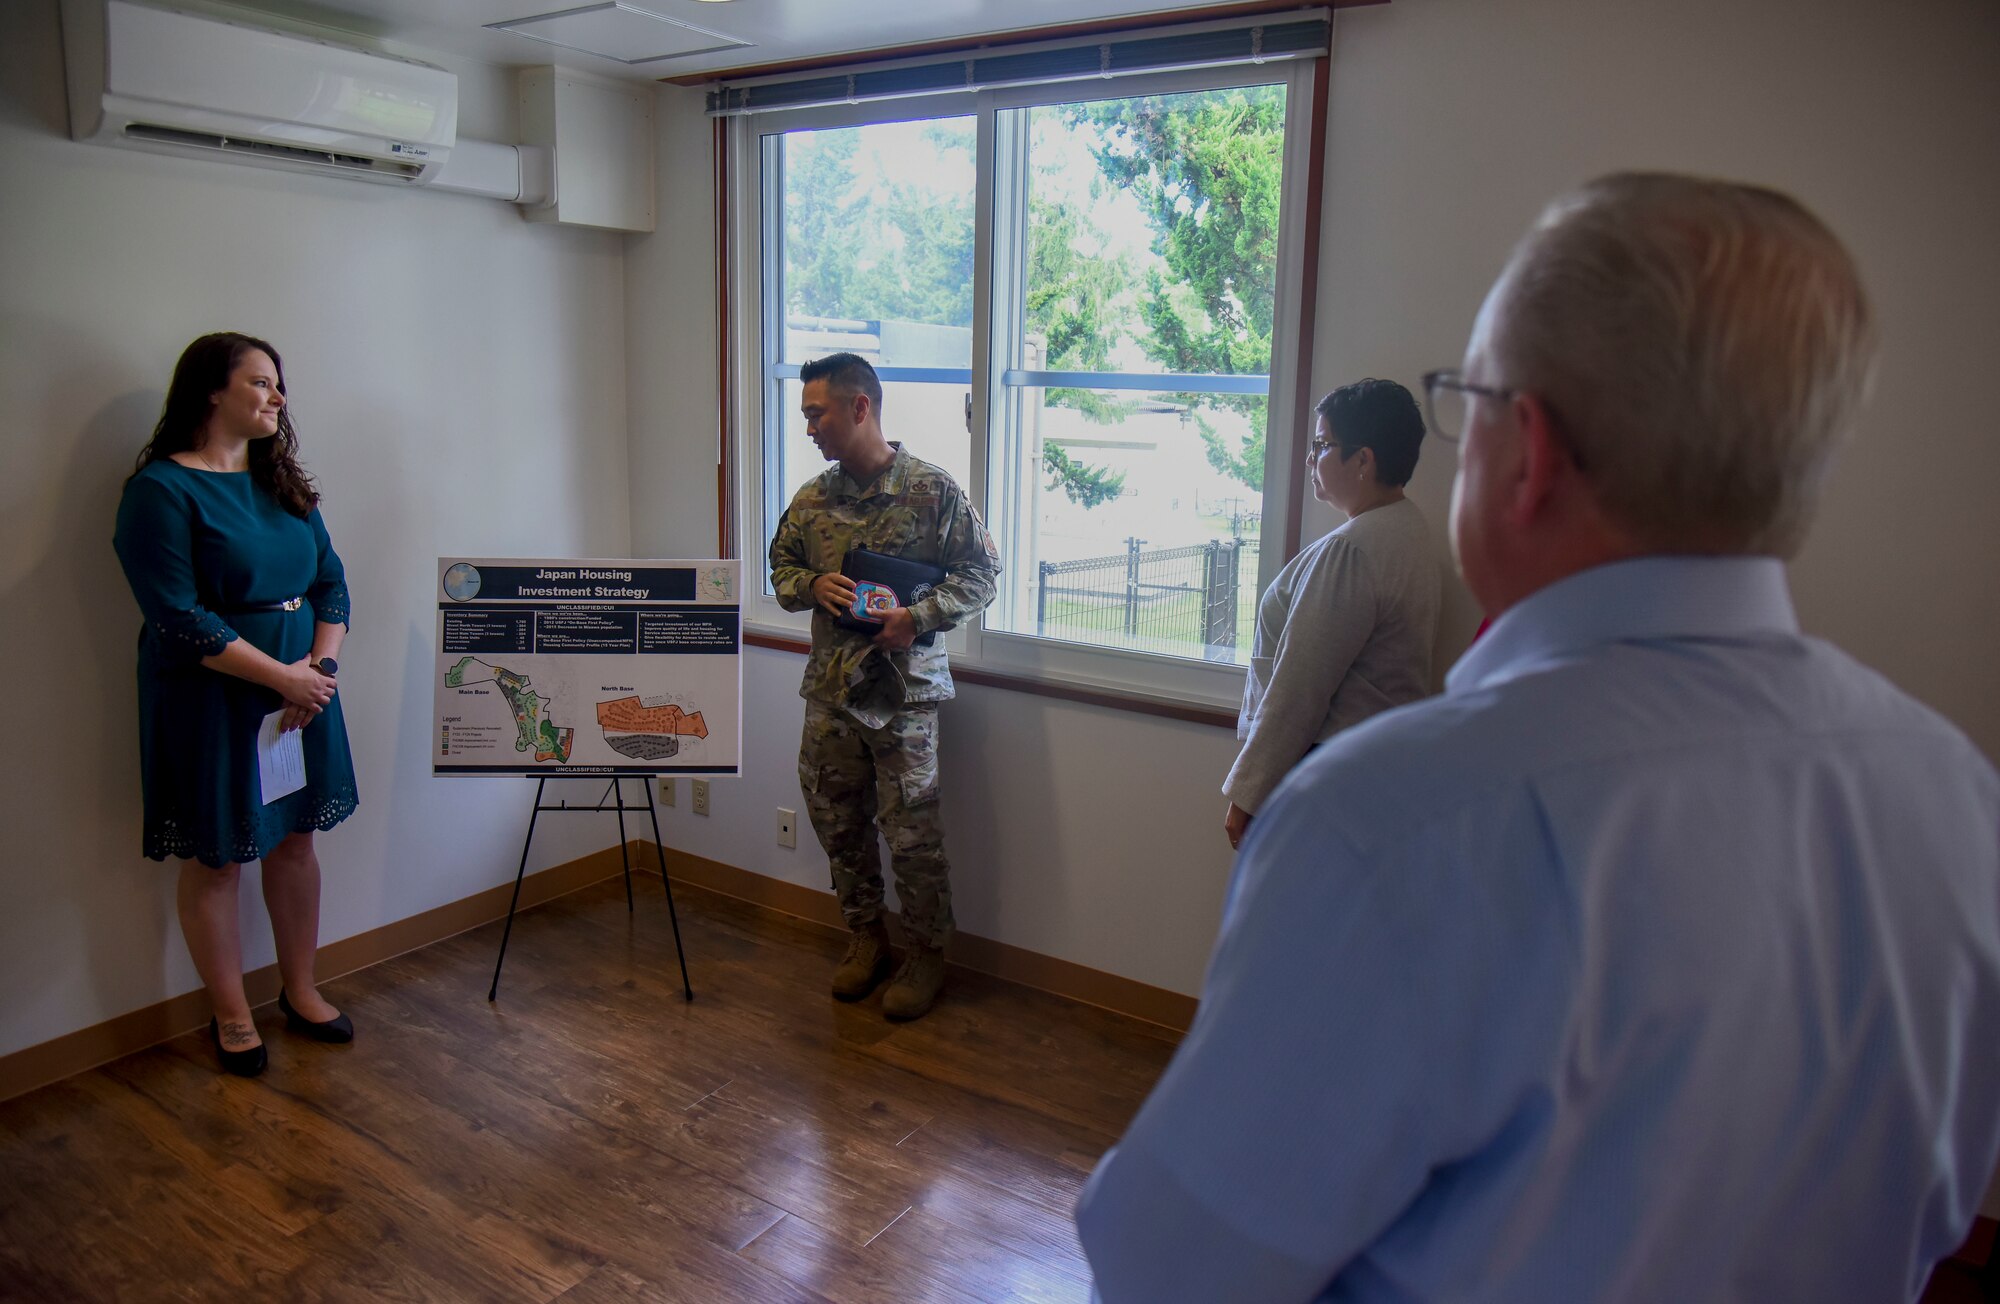 A military member presents a housing outline to members of the House Armed Services Committee.